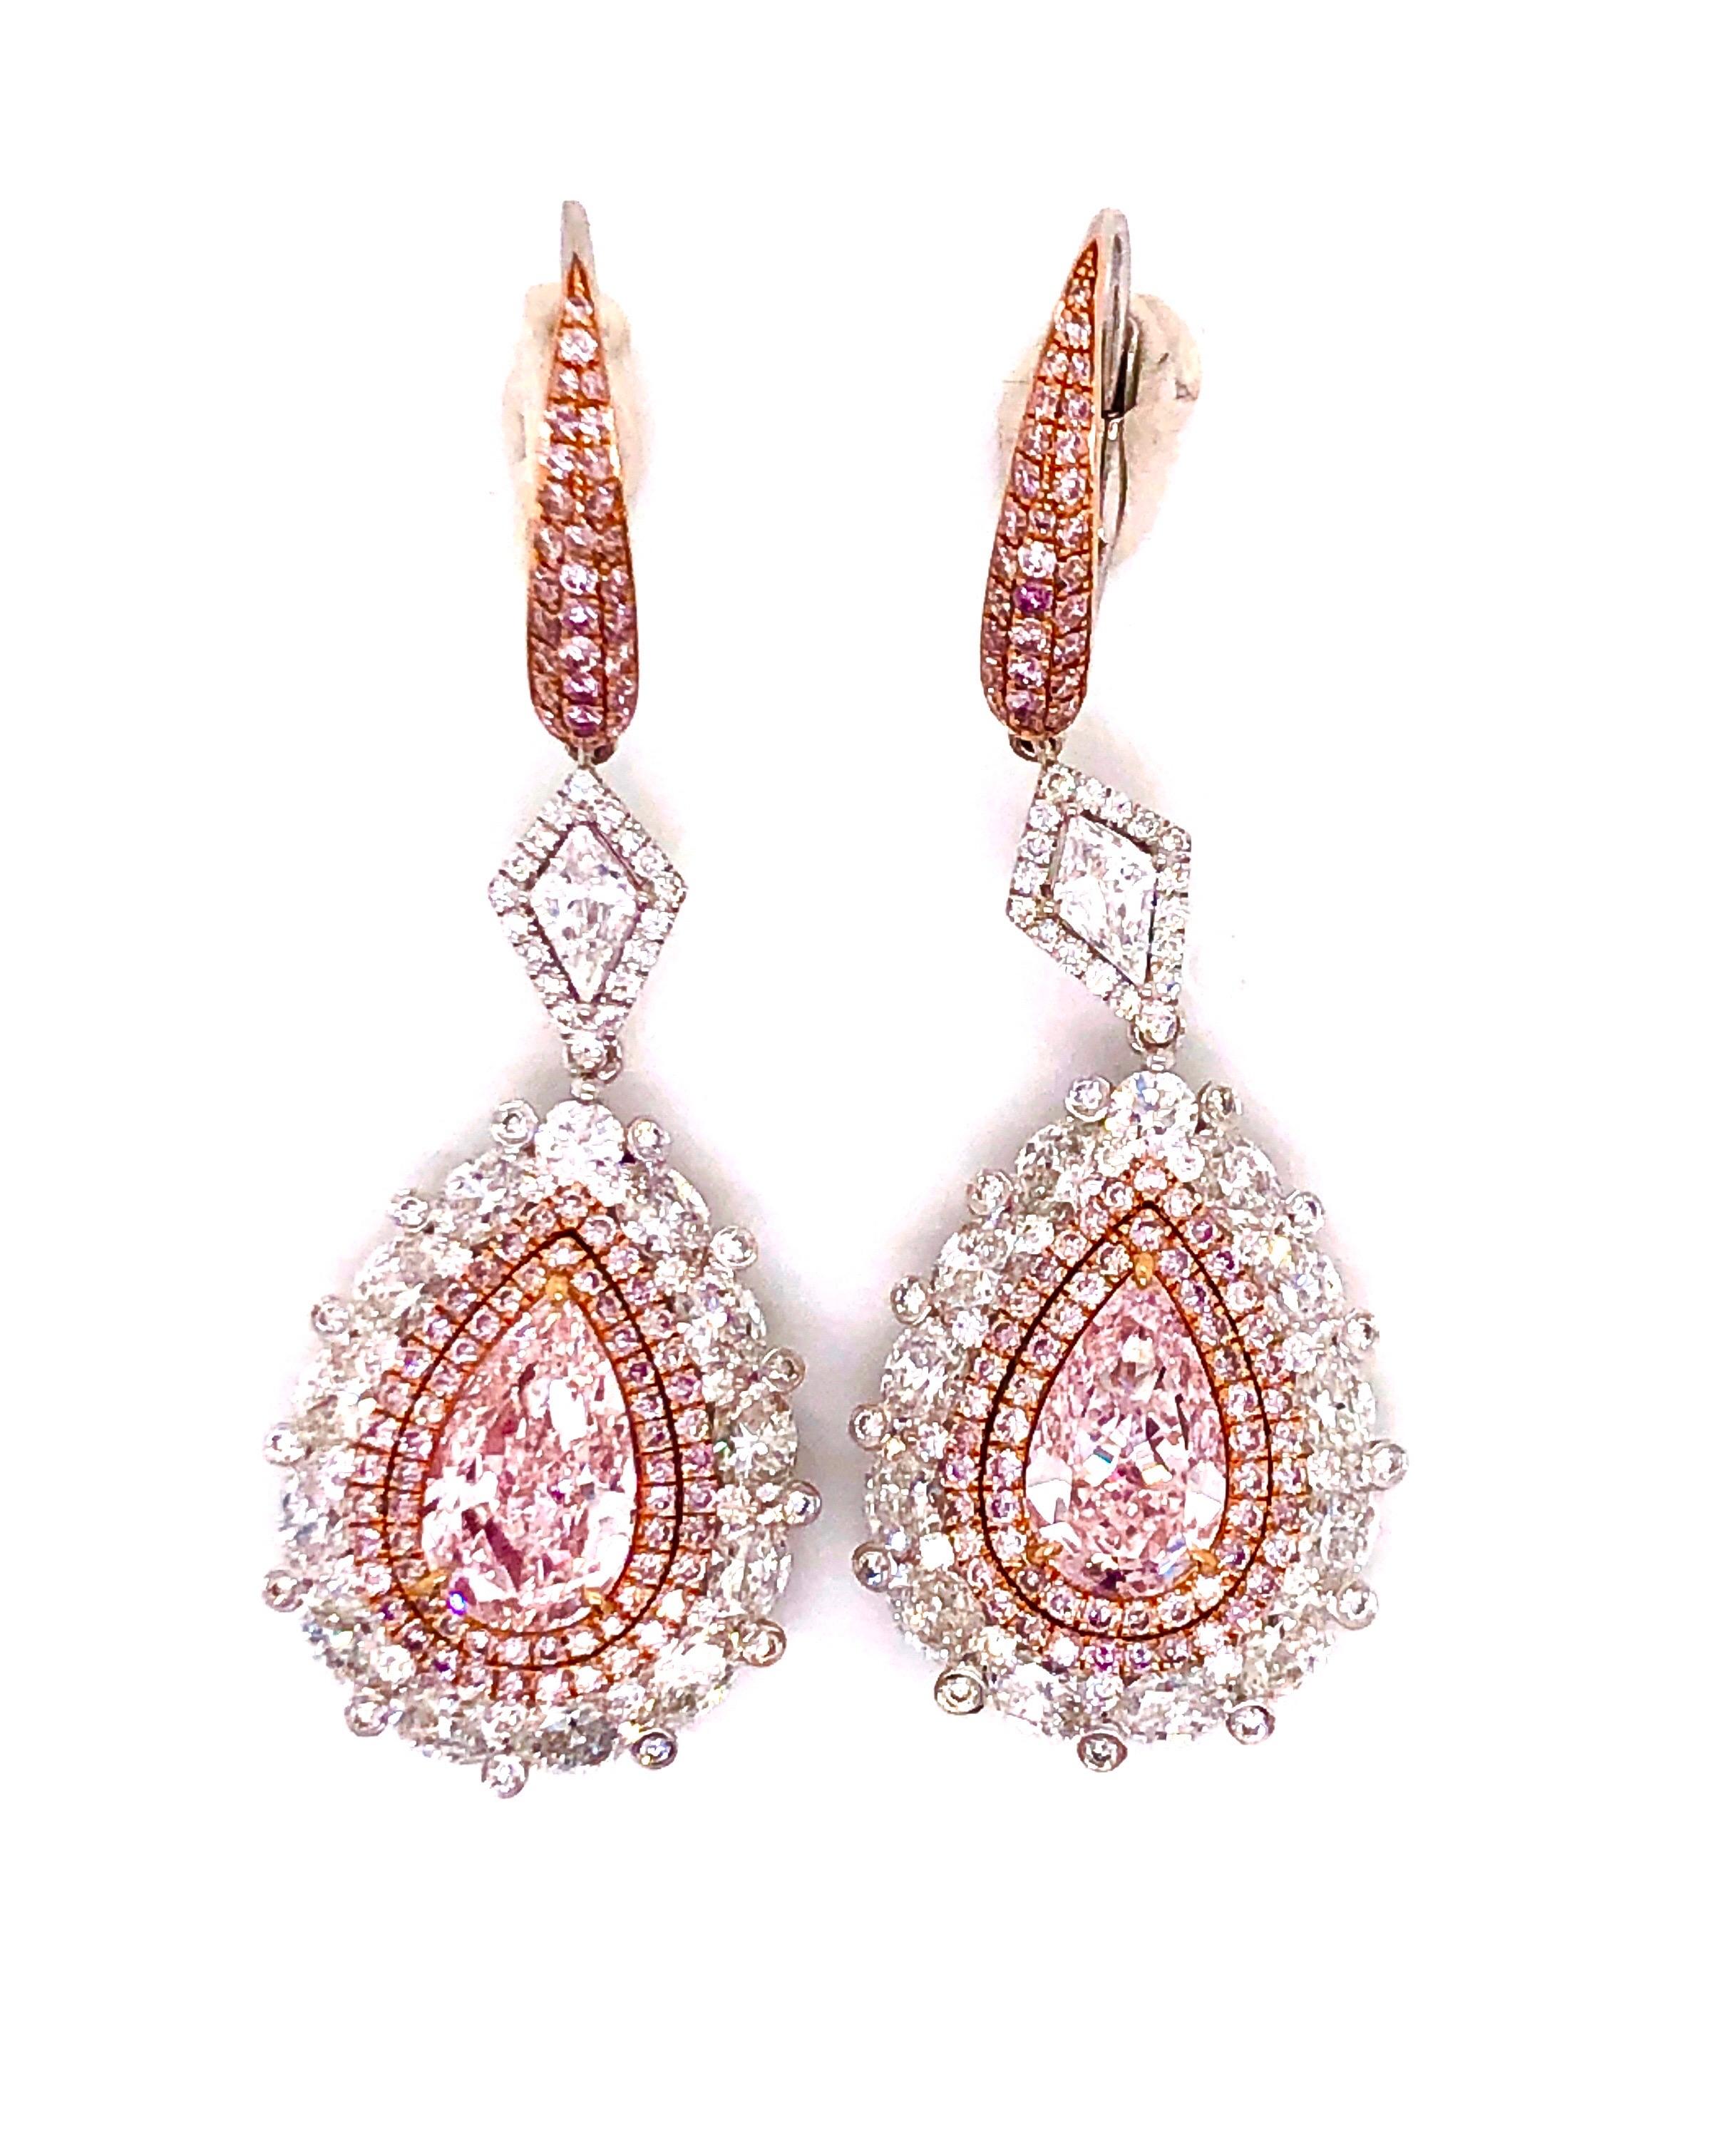 Showcasing 2 spectacular GIA certified natural pink diamonds just under 2.50ct for the pair. The clarity is exceptional indicated as vvs1/vs1. Please inquire for the GIA certificates and the total weight of these earrings (with the pave